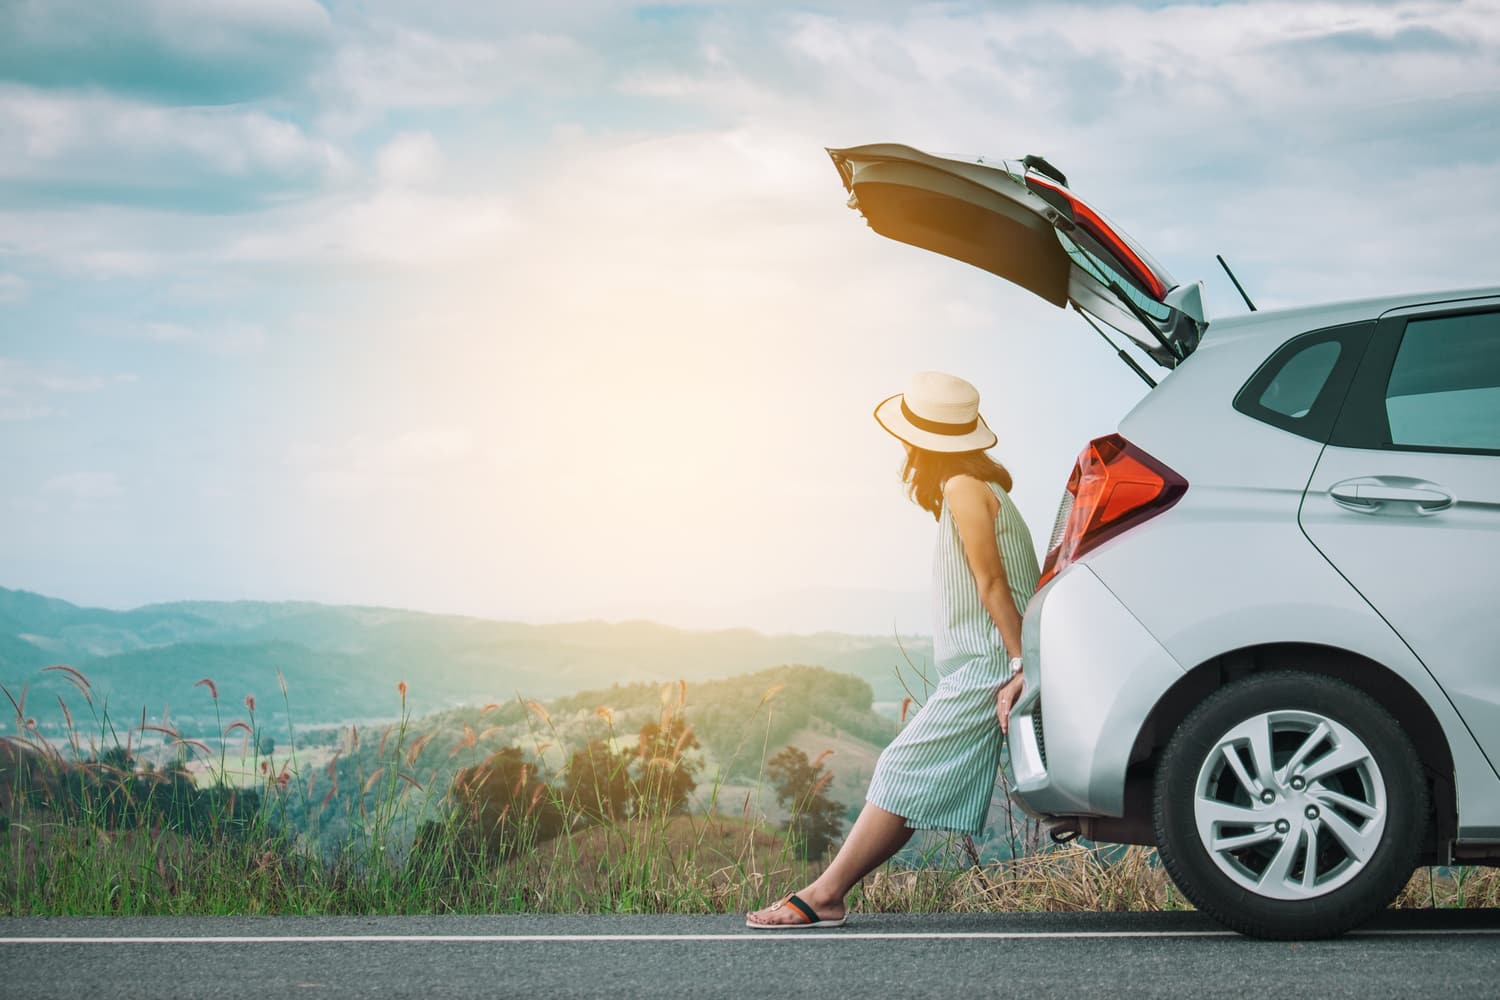 IS RENT A CAR SAFE FOR TRAVELLING?